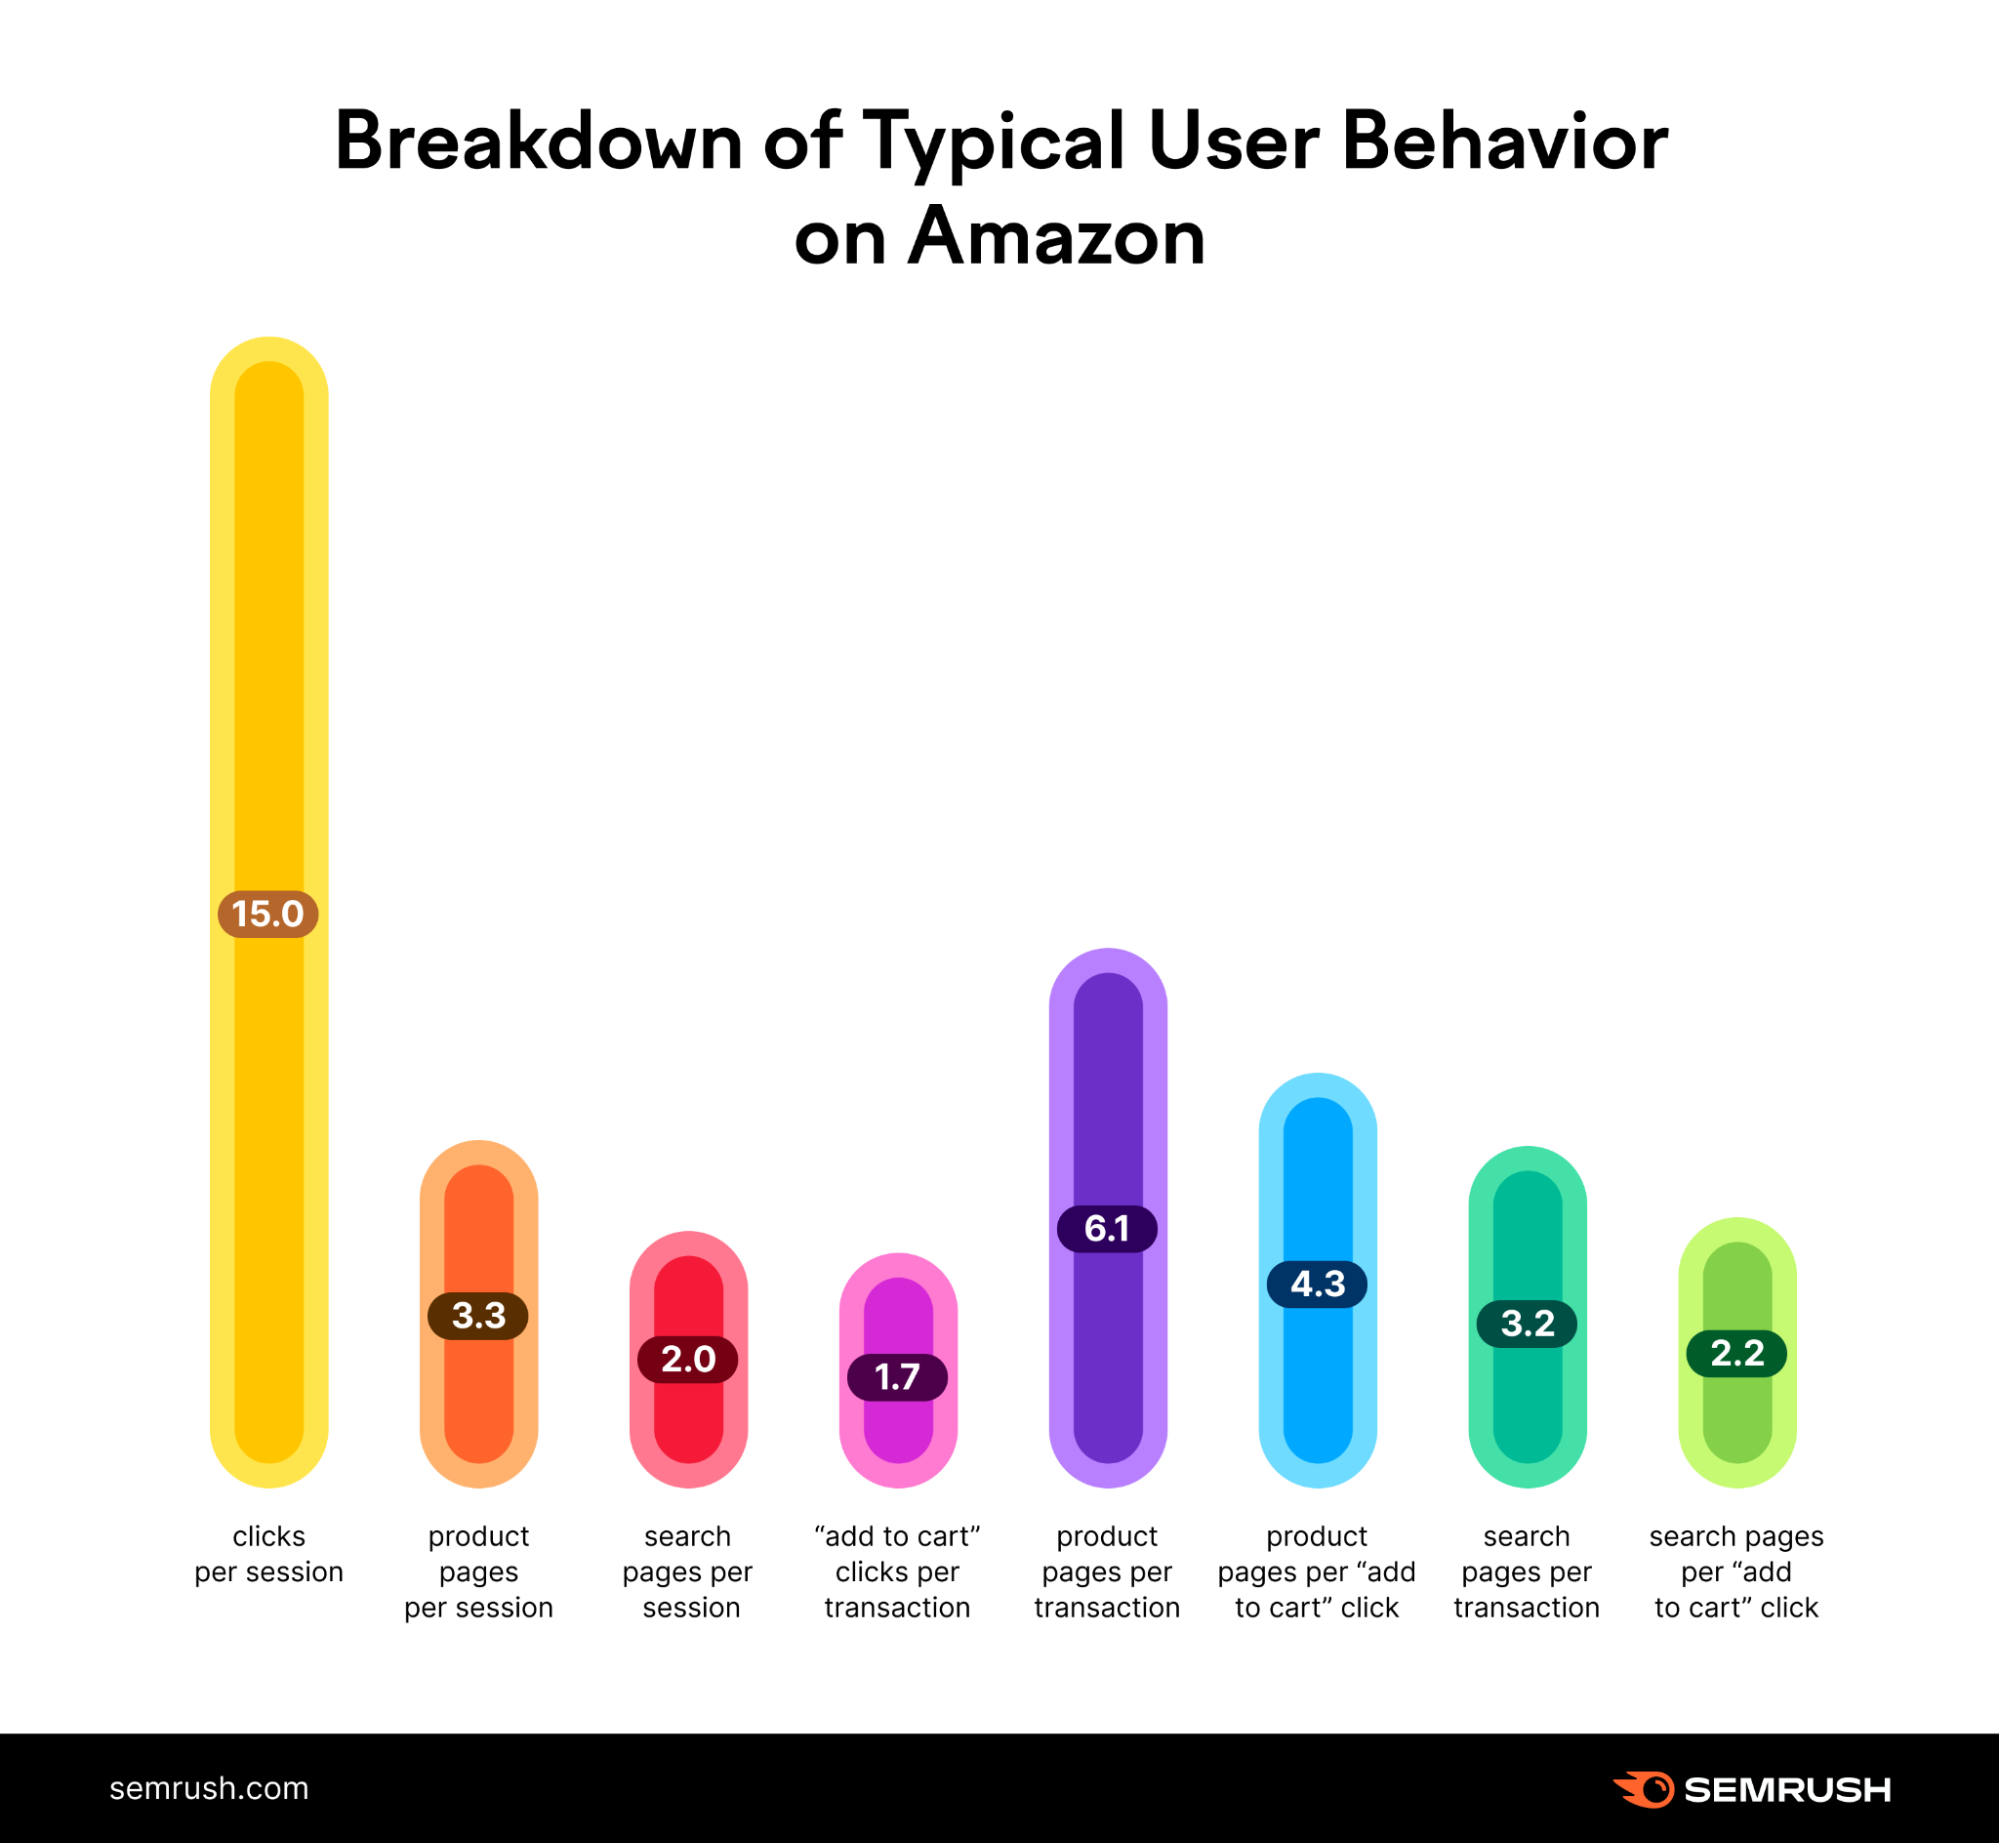 A breakdown of the typical user behavior on Amazon: Clicks per session: 15.0 Product pages per session: 3.3 Search pages per session: 2.0 Cart clicks per transaction: 1.7 Product pages per transaction: 6.1 Product pages per cart click: 4.3 Search pages per transaction: 3.2 Search pages per cart click: 2.2